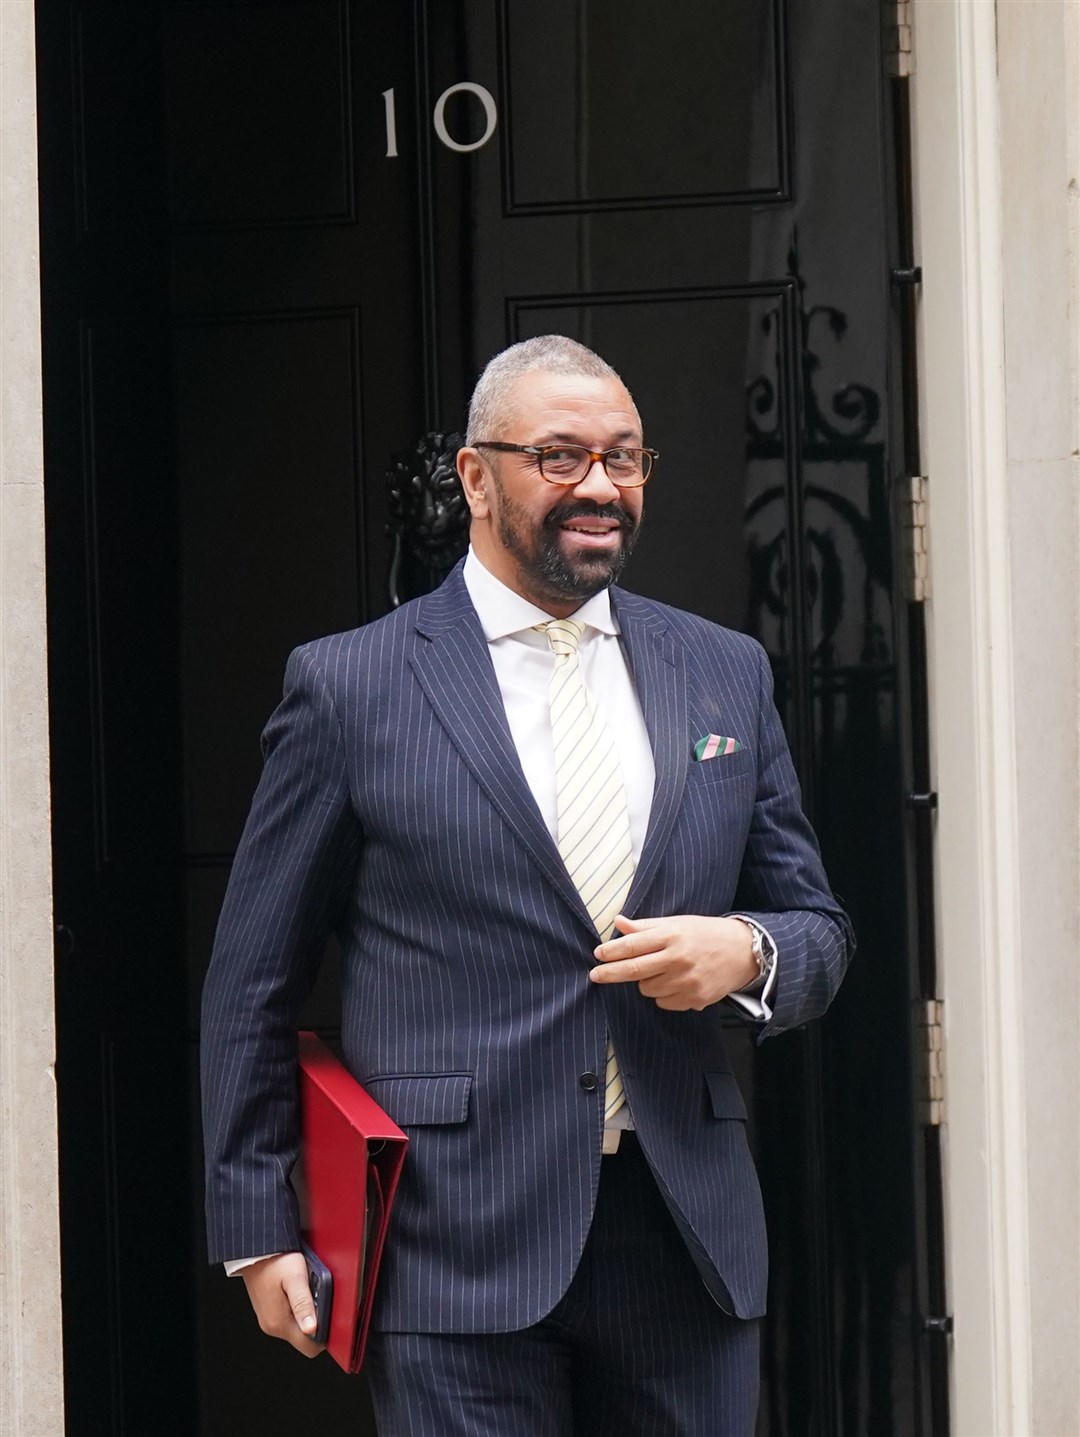 James Cleverly raised eyebrows among some Tories by saying the Rwanda plan was not the ‘be all and end all’ to stopping Channel crossings (Yui Mok/PA)